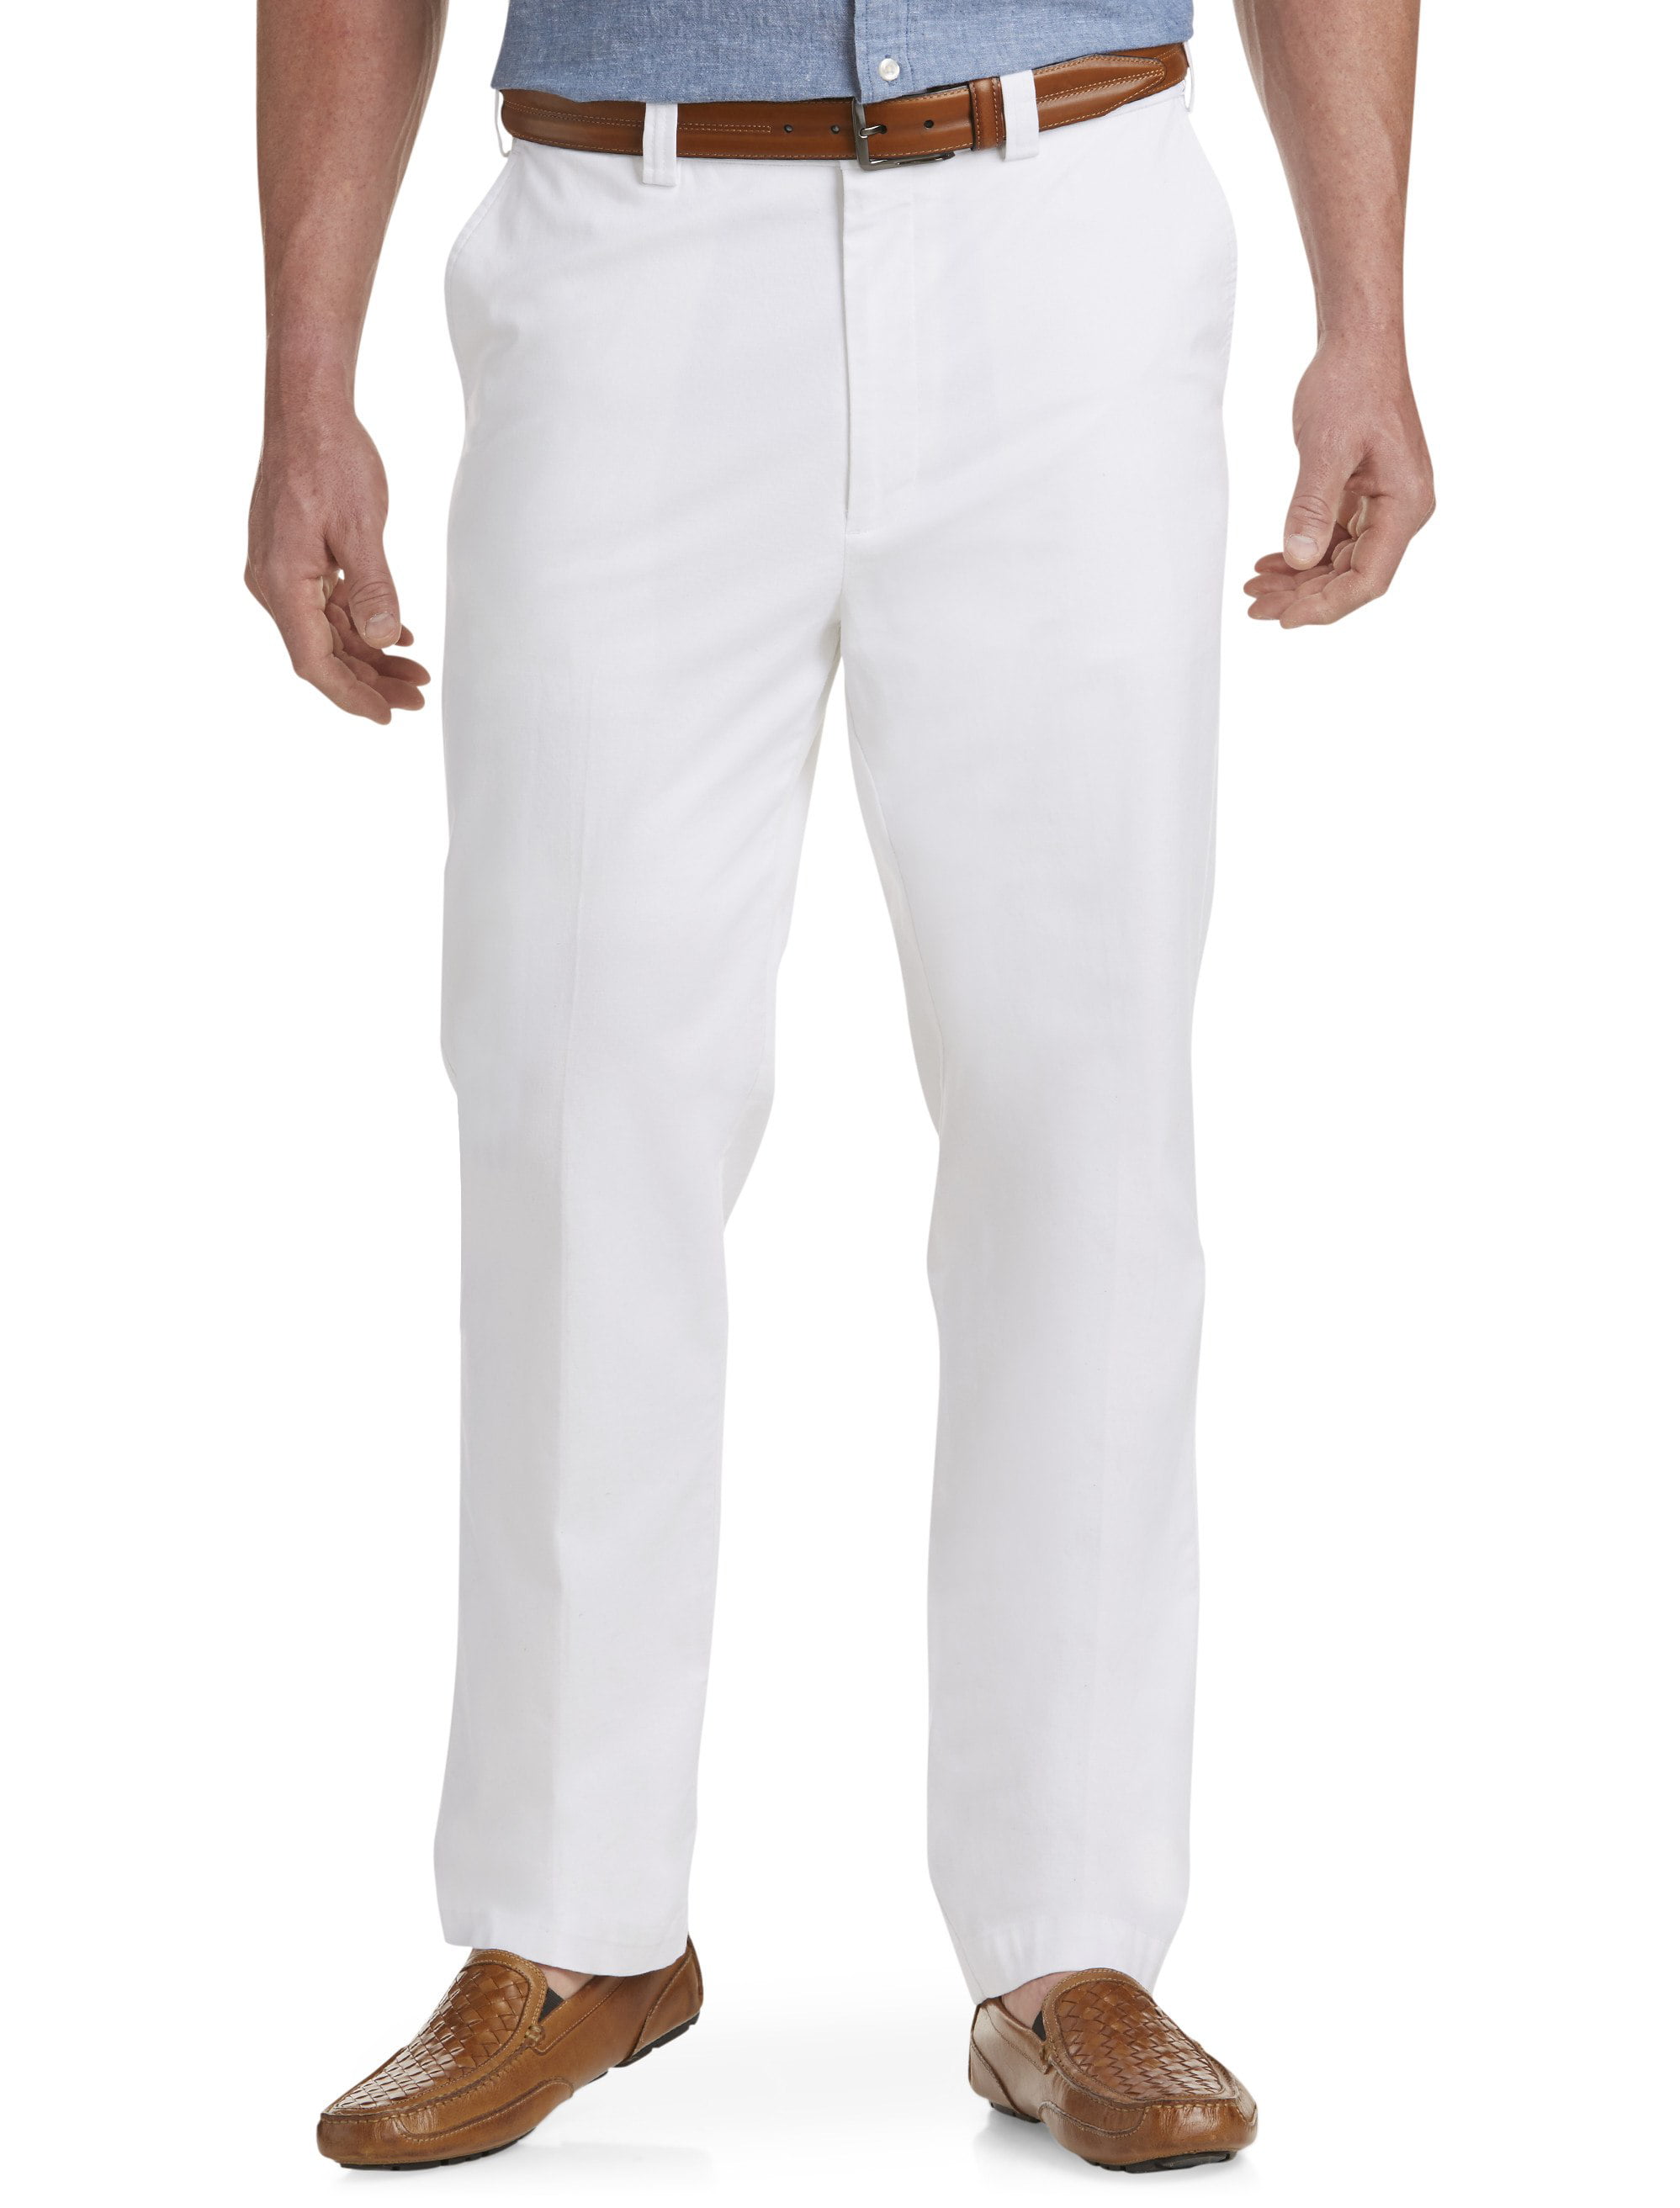 Oak Hill by DXL Big and Tall Straight-Fit Waist-Relaxer Stretch Twill Pants 